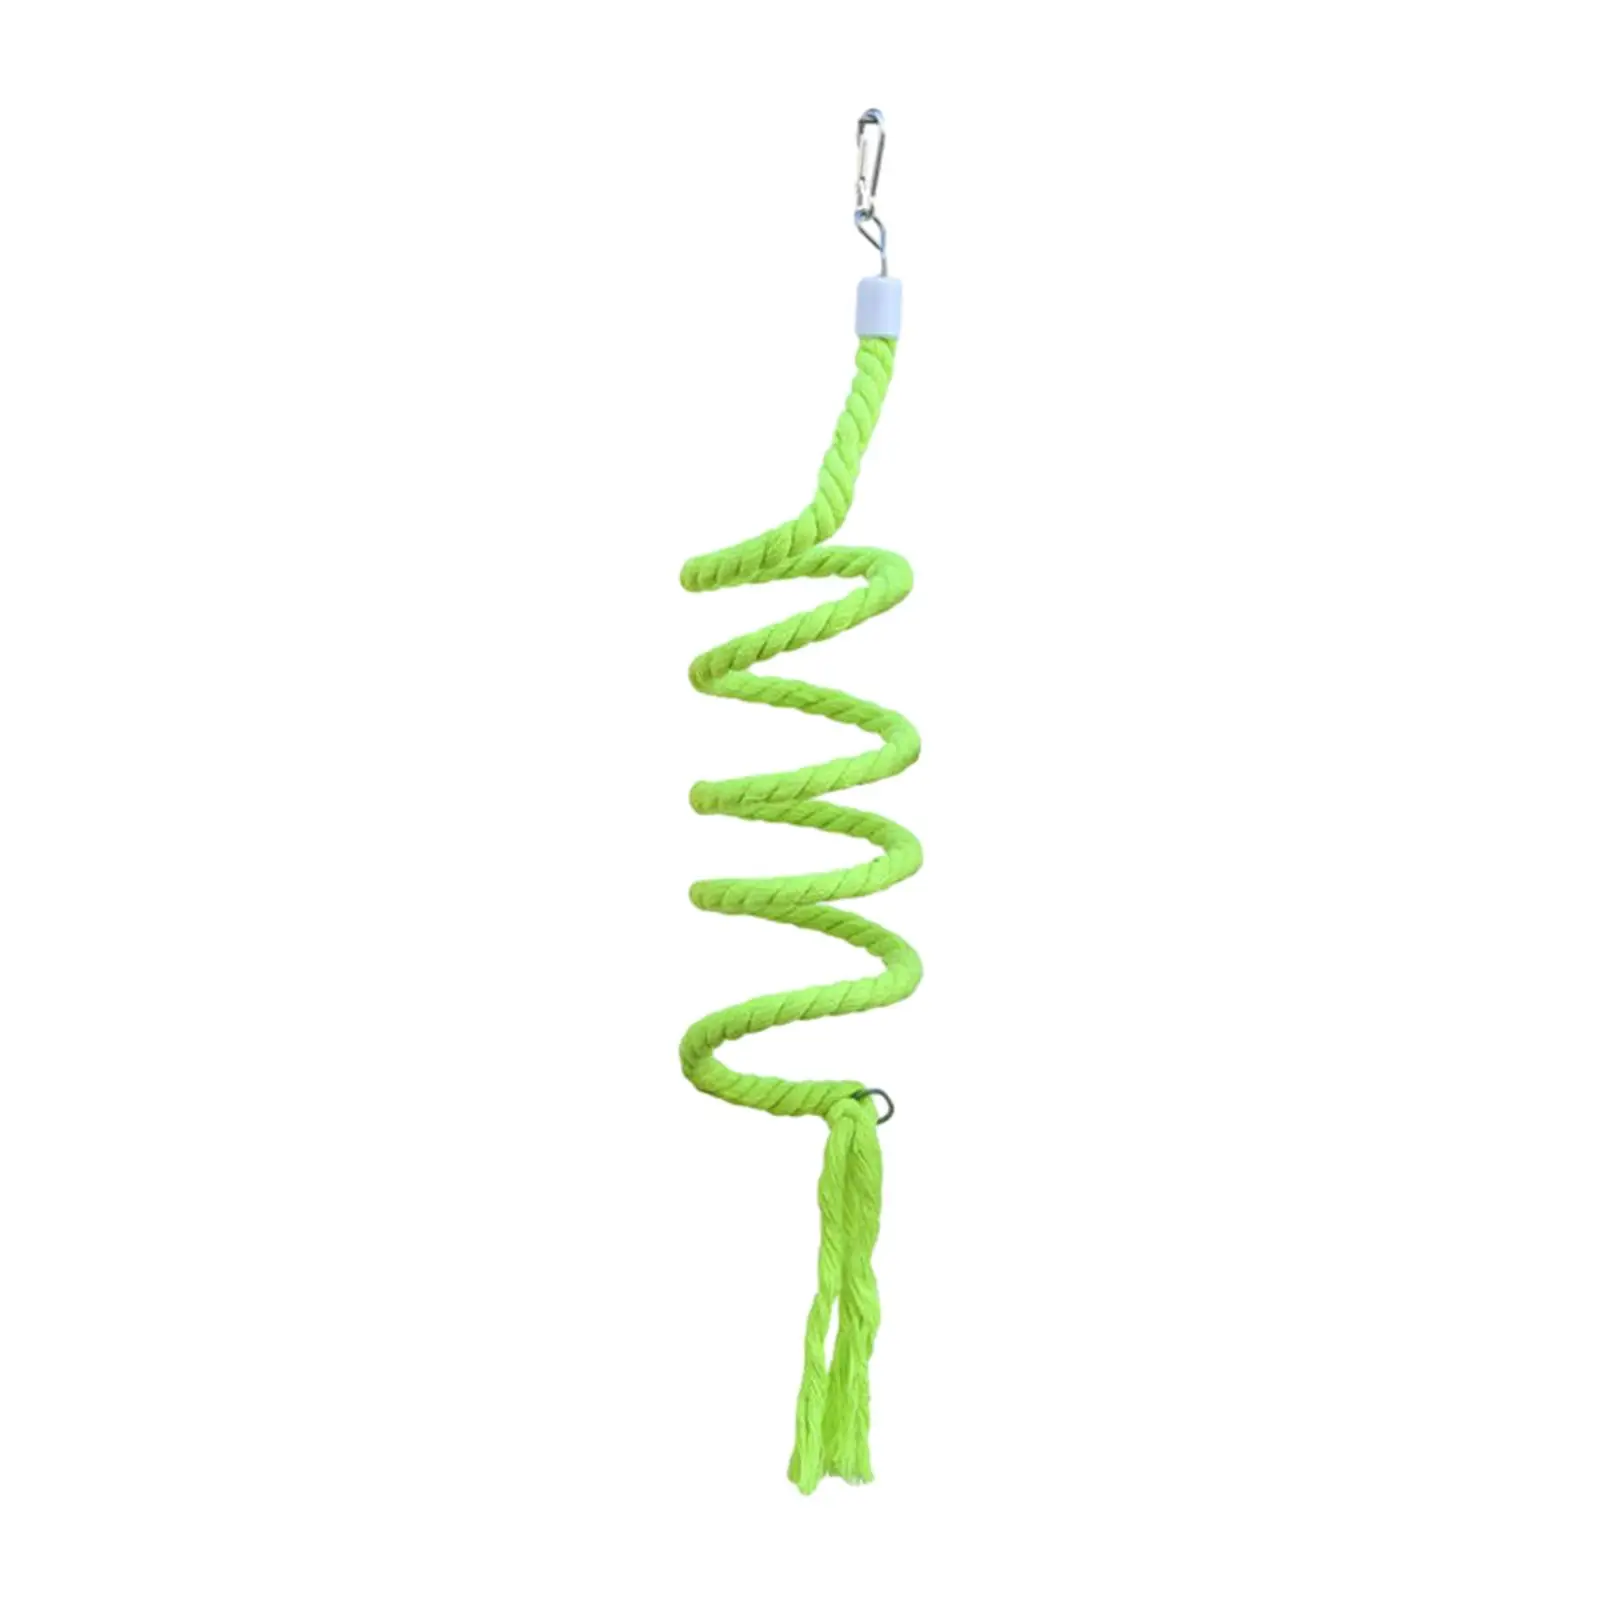 Bird Rope Perch Pet Supplies Cotton Rope Chewing Parrot Spiral Swing Perch for Parakeets Lovebirds Cockatiels Conures Budgies